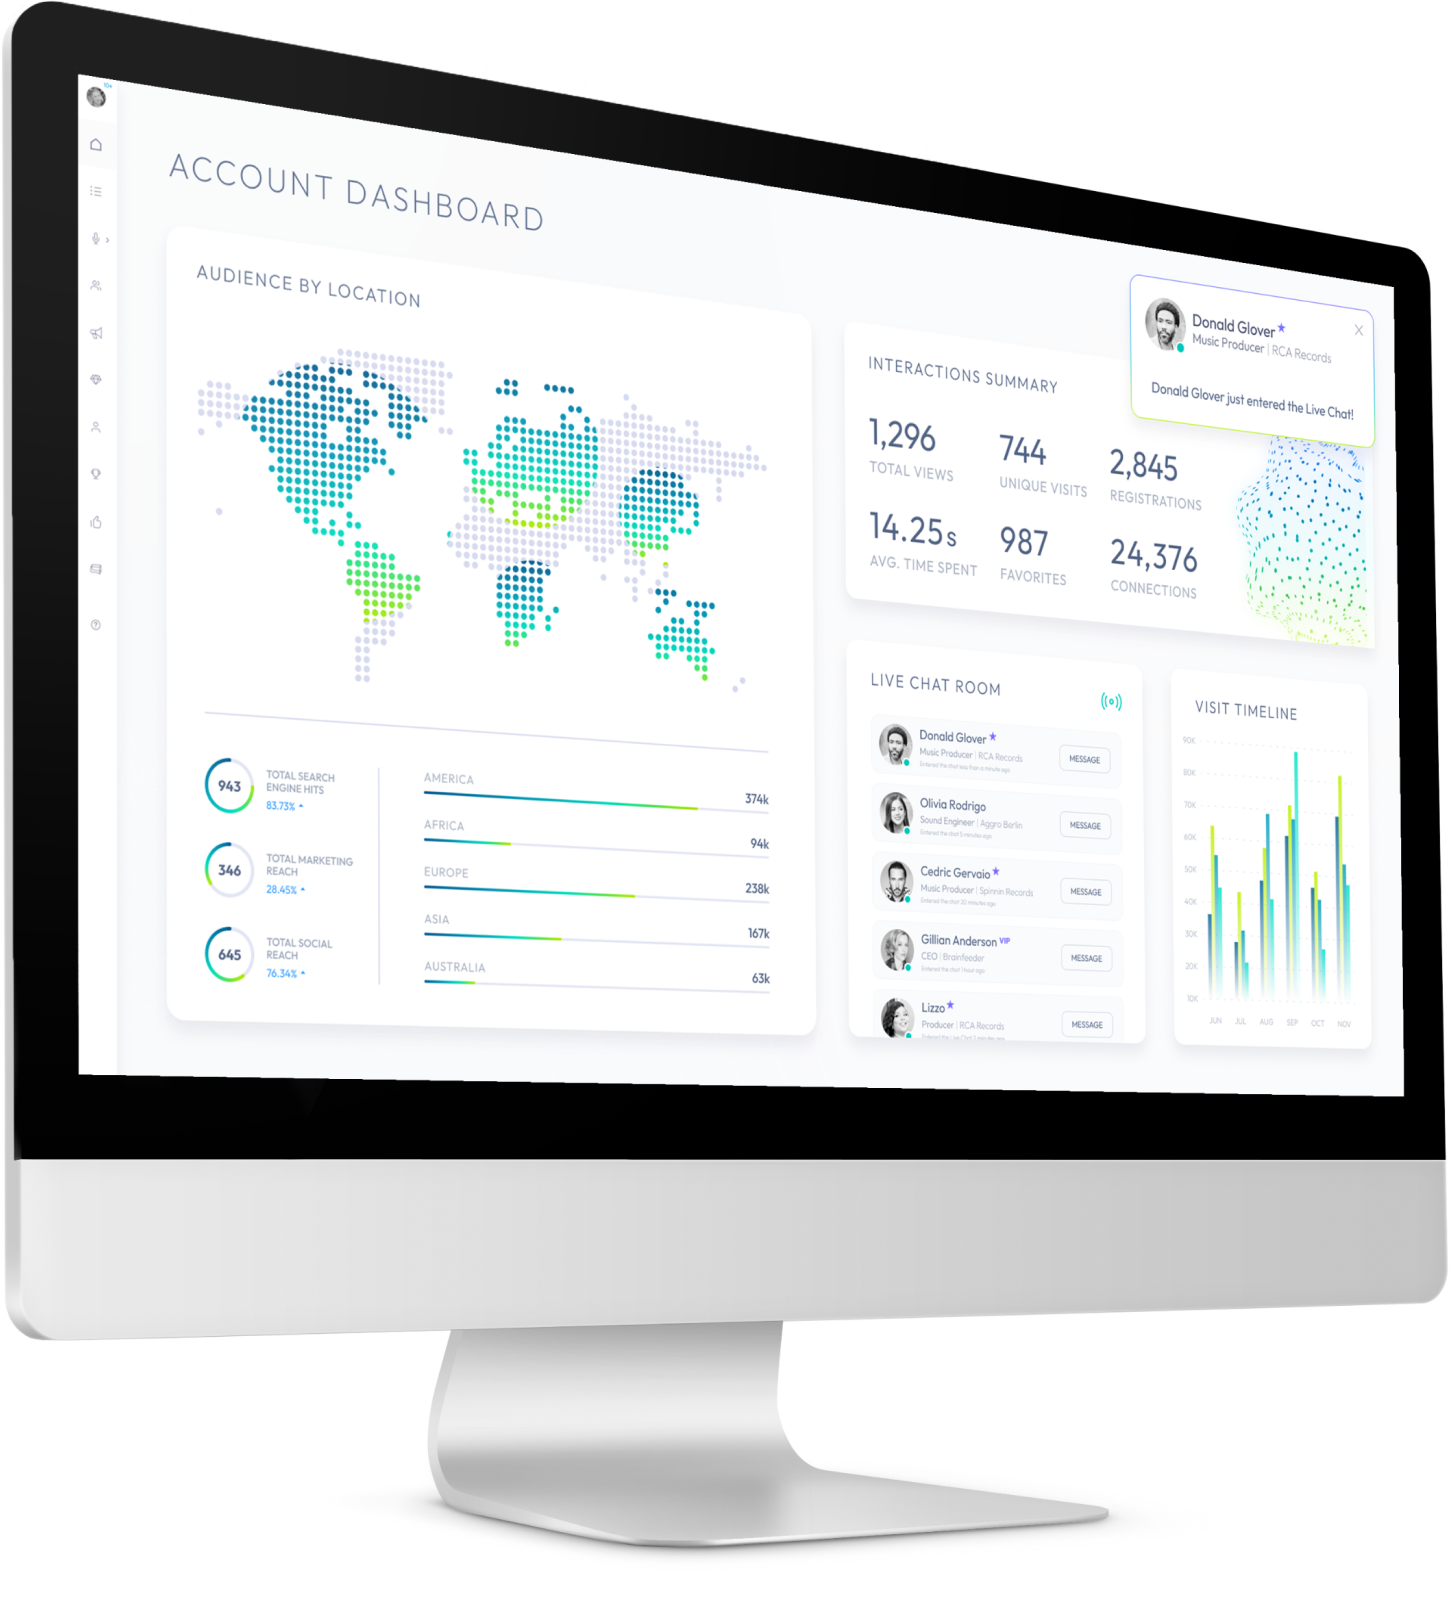 Desktop Mockup Showing Dashboard With Insights and Analytics in Light Mode